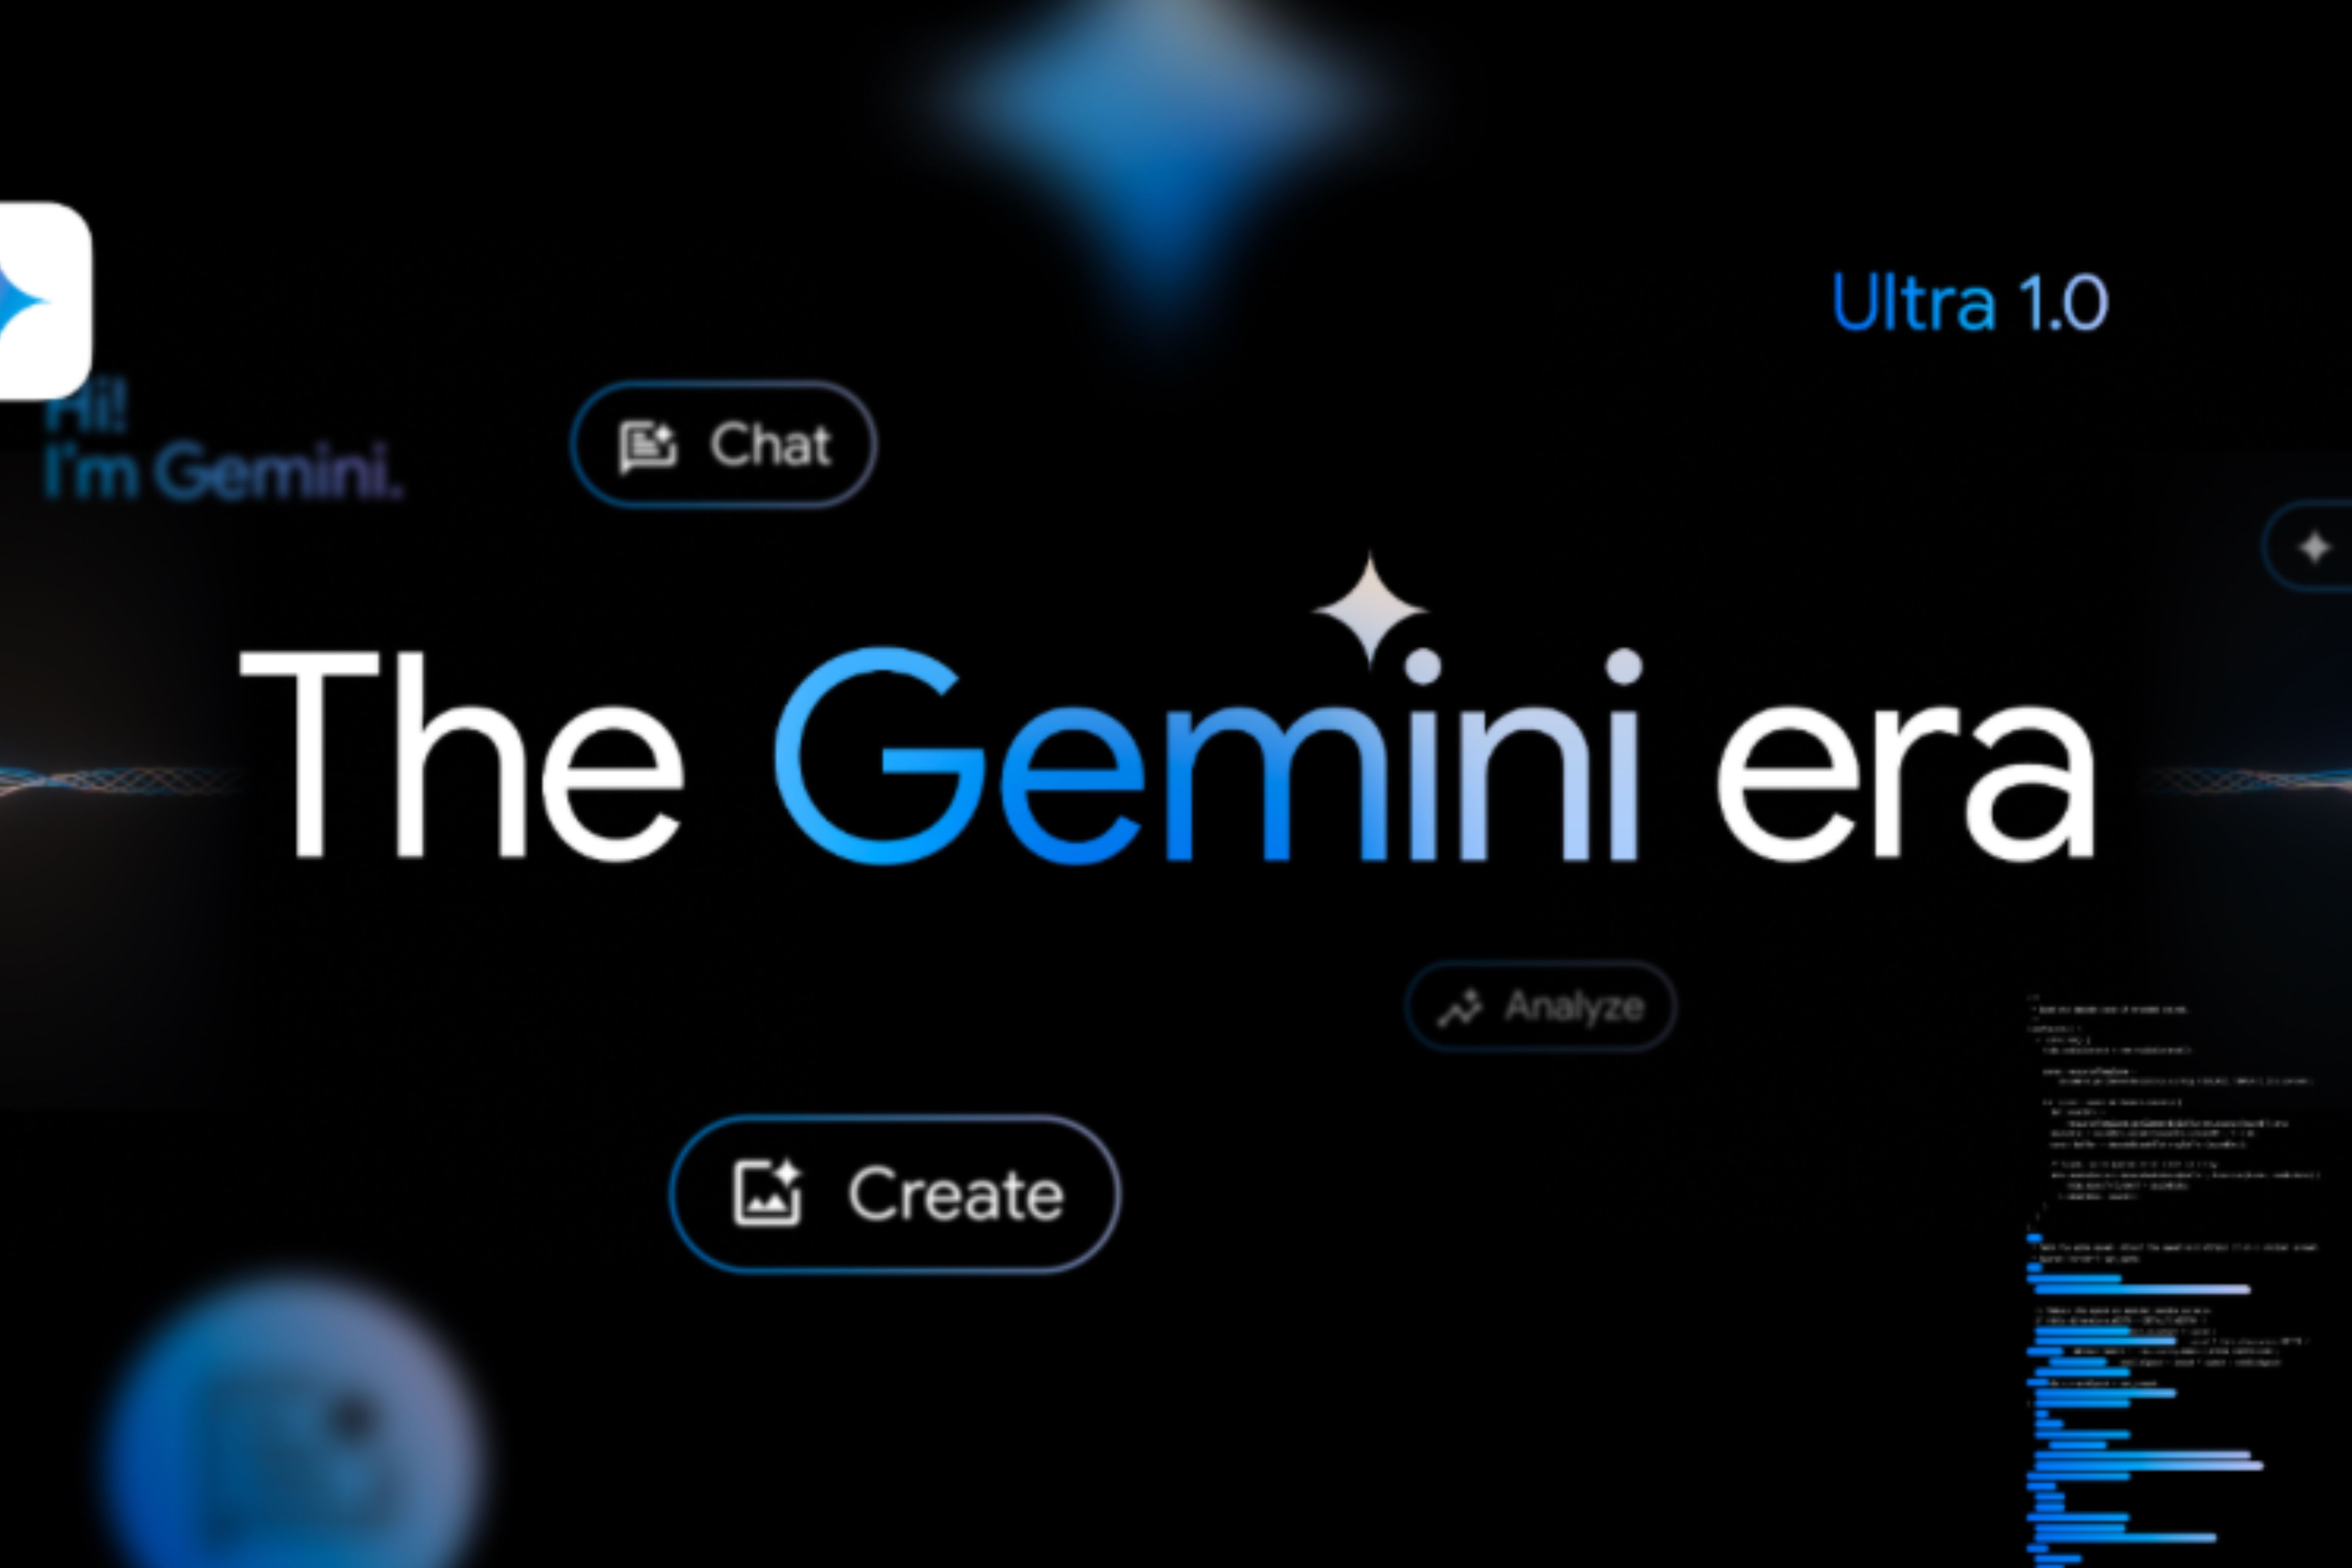 Google Gemini: What Is It, And How Does It Work? image courtesy www.xda-developers.com